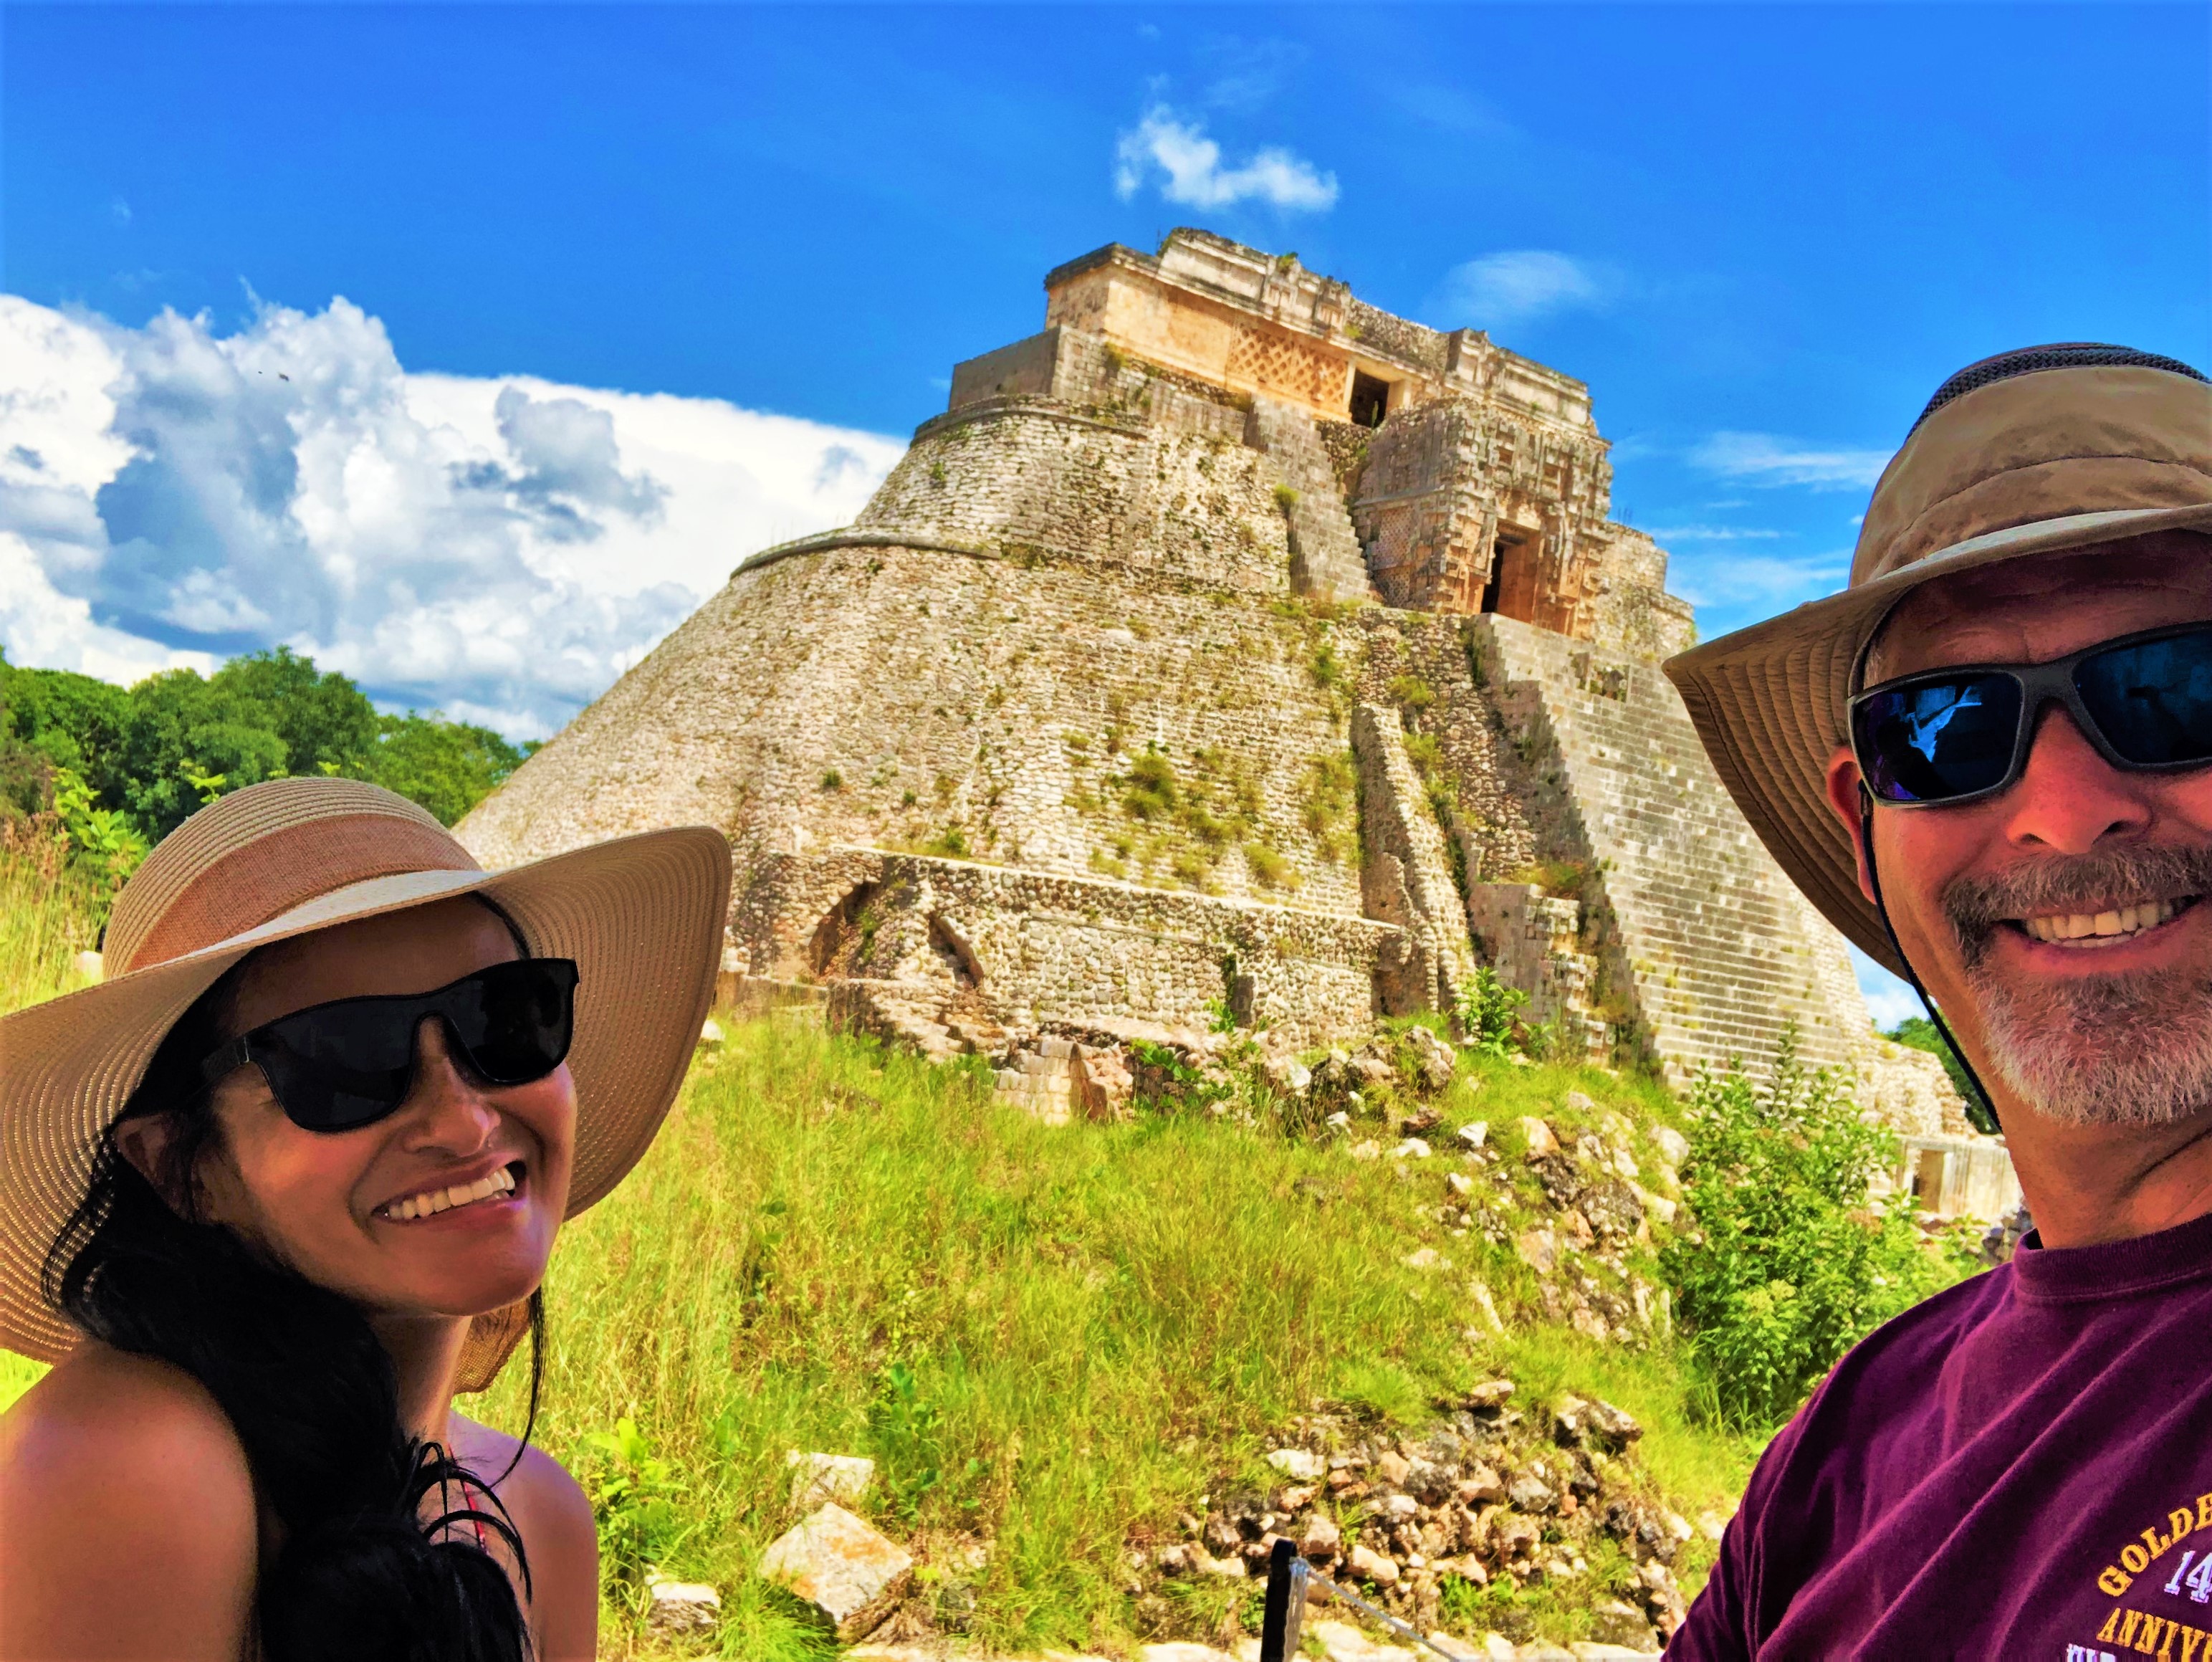 Uxmal is a Mayan ruins on par with Chichen Itza